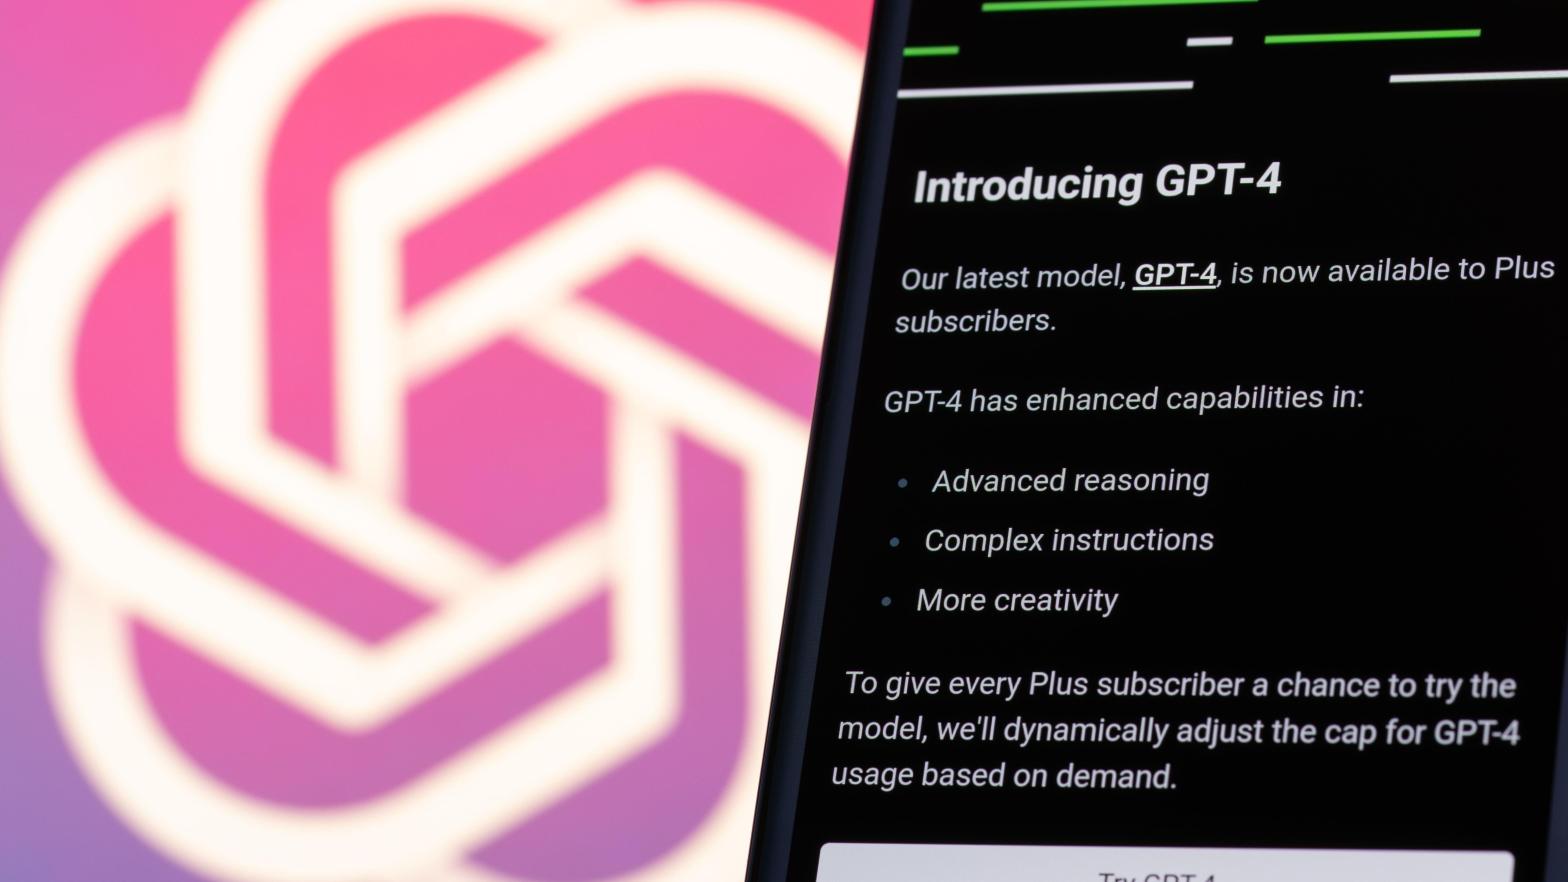 OpenAI released GPT-4 on Tuesday, but while touting its new capabilities the company also said it wasn't planning to share what kind of data went in to training the model. (Image: Daniel Chetroni, Shutterstock)